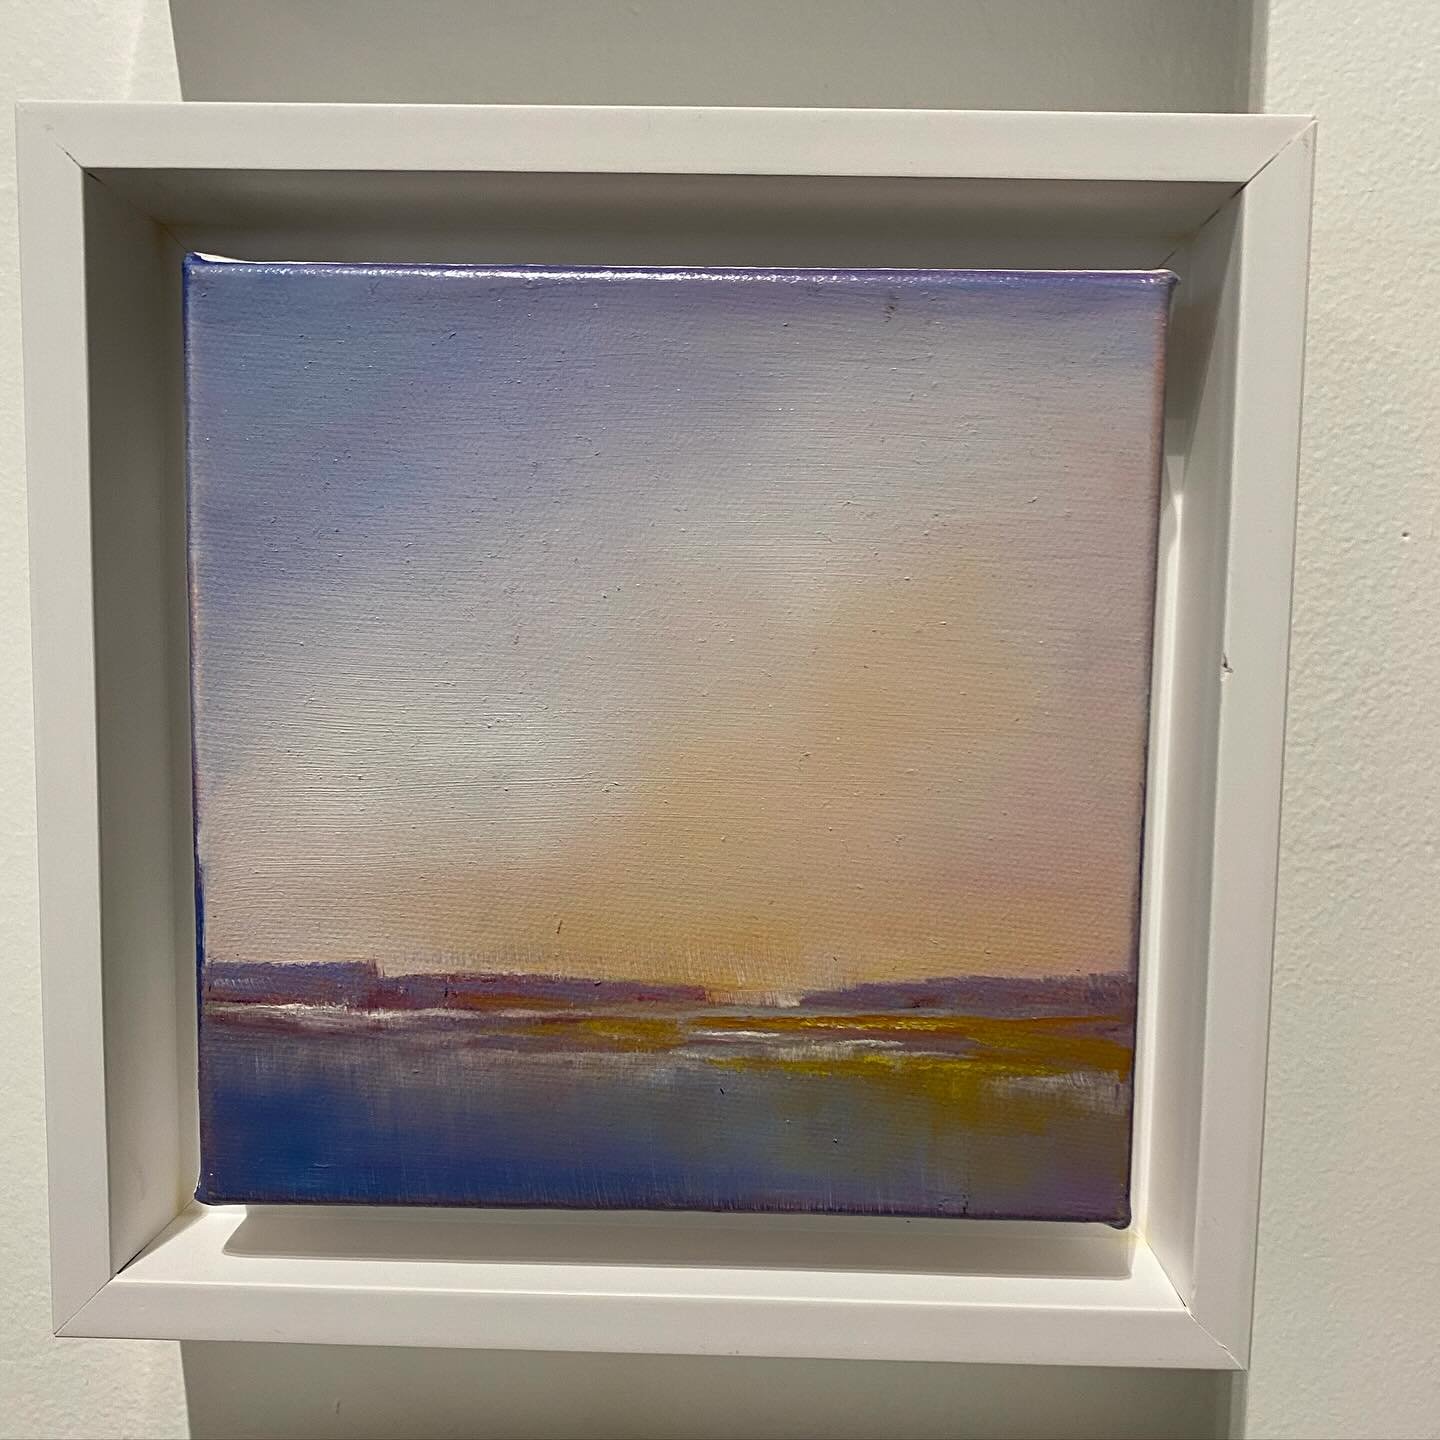 In the shop - these sweet little framed oil on canvas landscapes by @kdtooheyart ! Perfect for a hall, powder room or any small space needing some personality!
Makes a great Mothers Day gift !
#buyart #supportlocalartists #shoplocal #authentic #noton